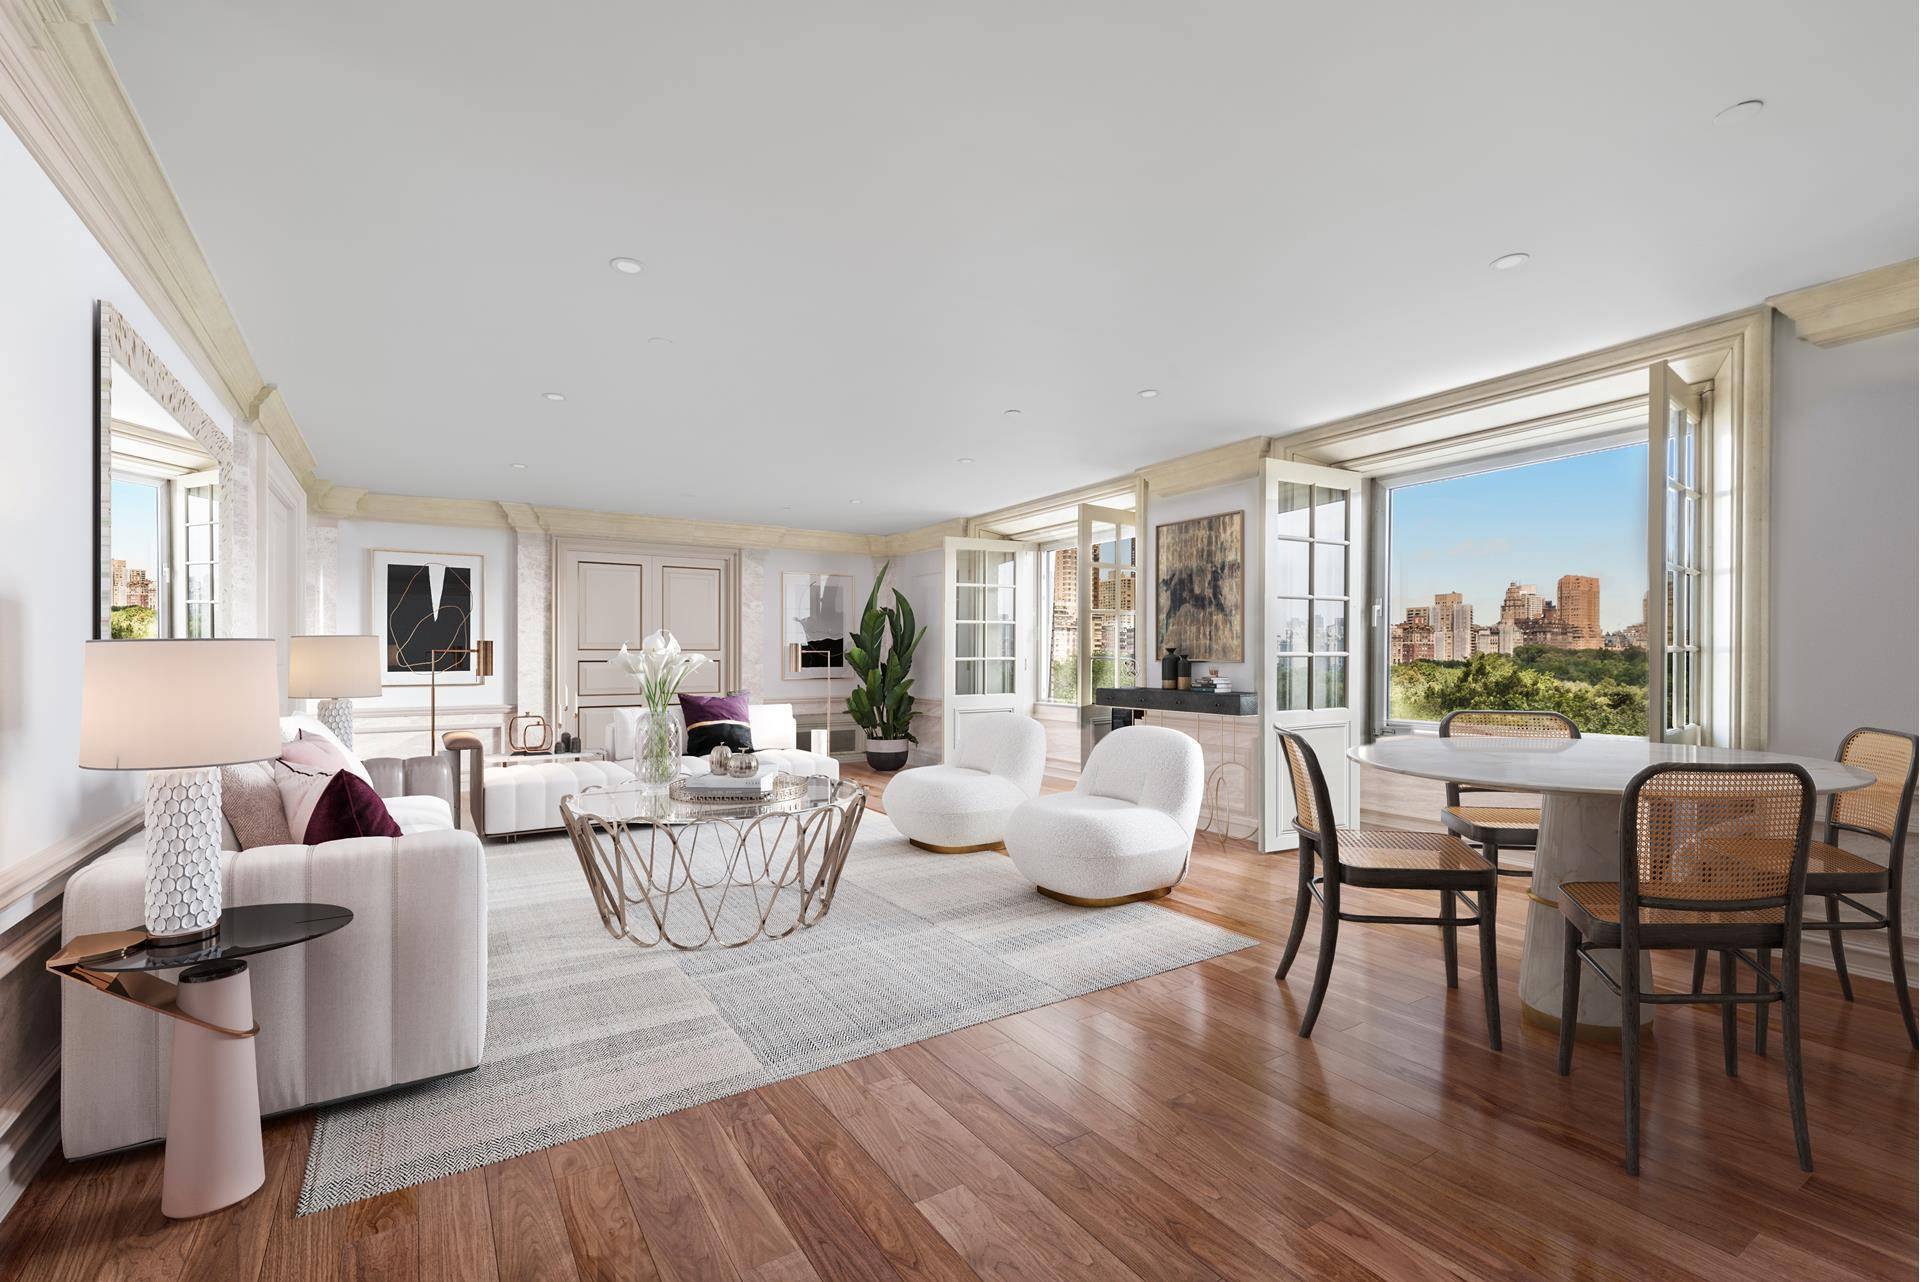 Your dream has come true, this Central Park front at the JW Marriott Essex House enjoys over 40 linear feet of direct, front row views of Central Park and the ...